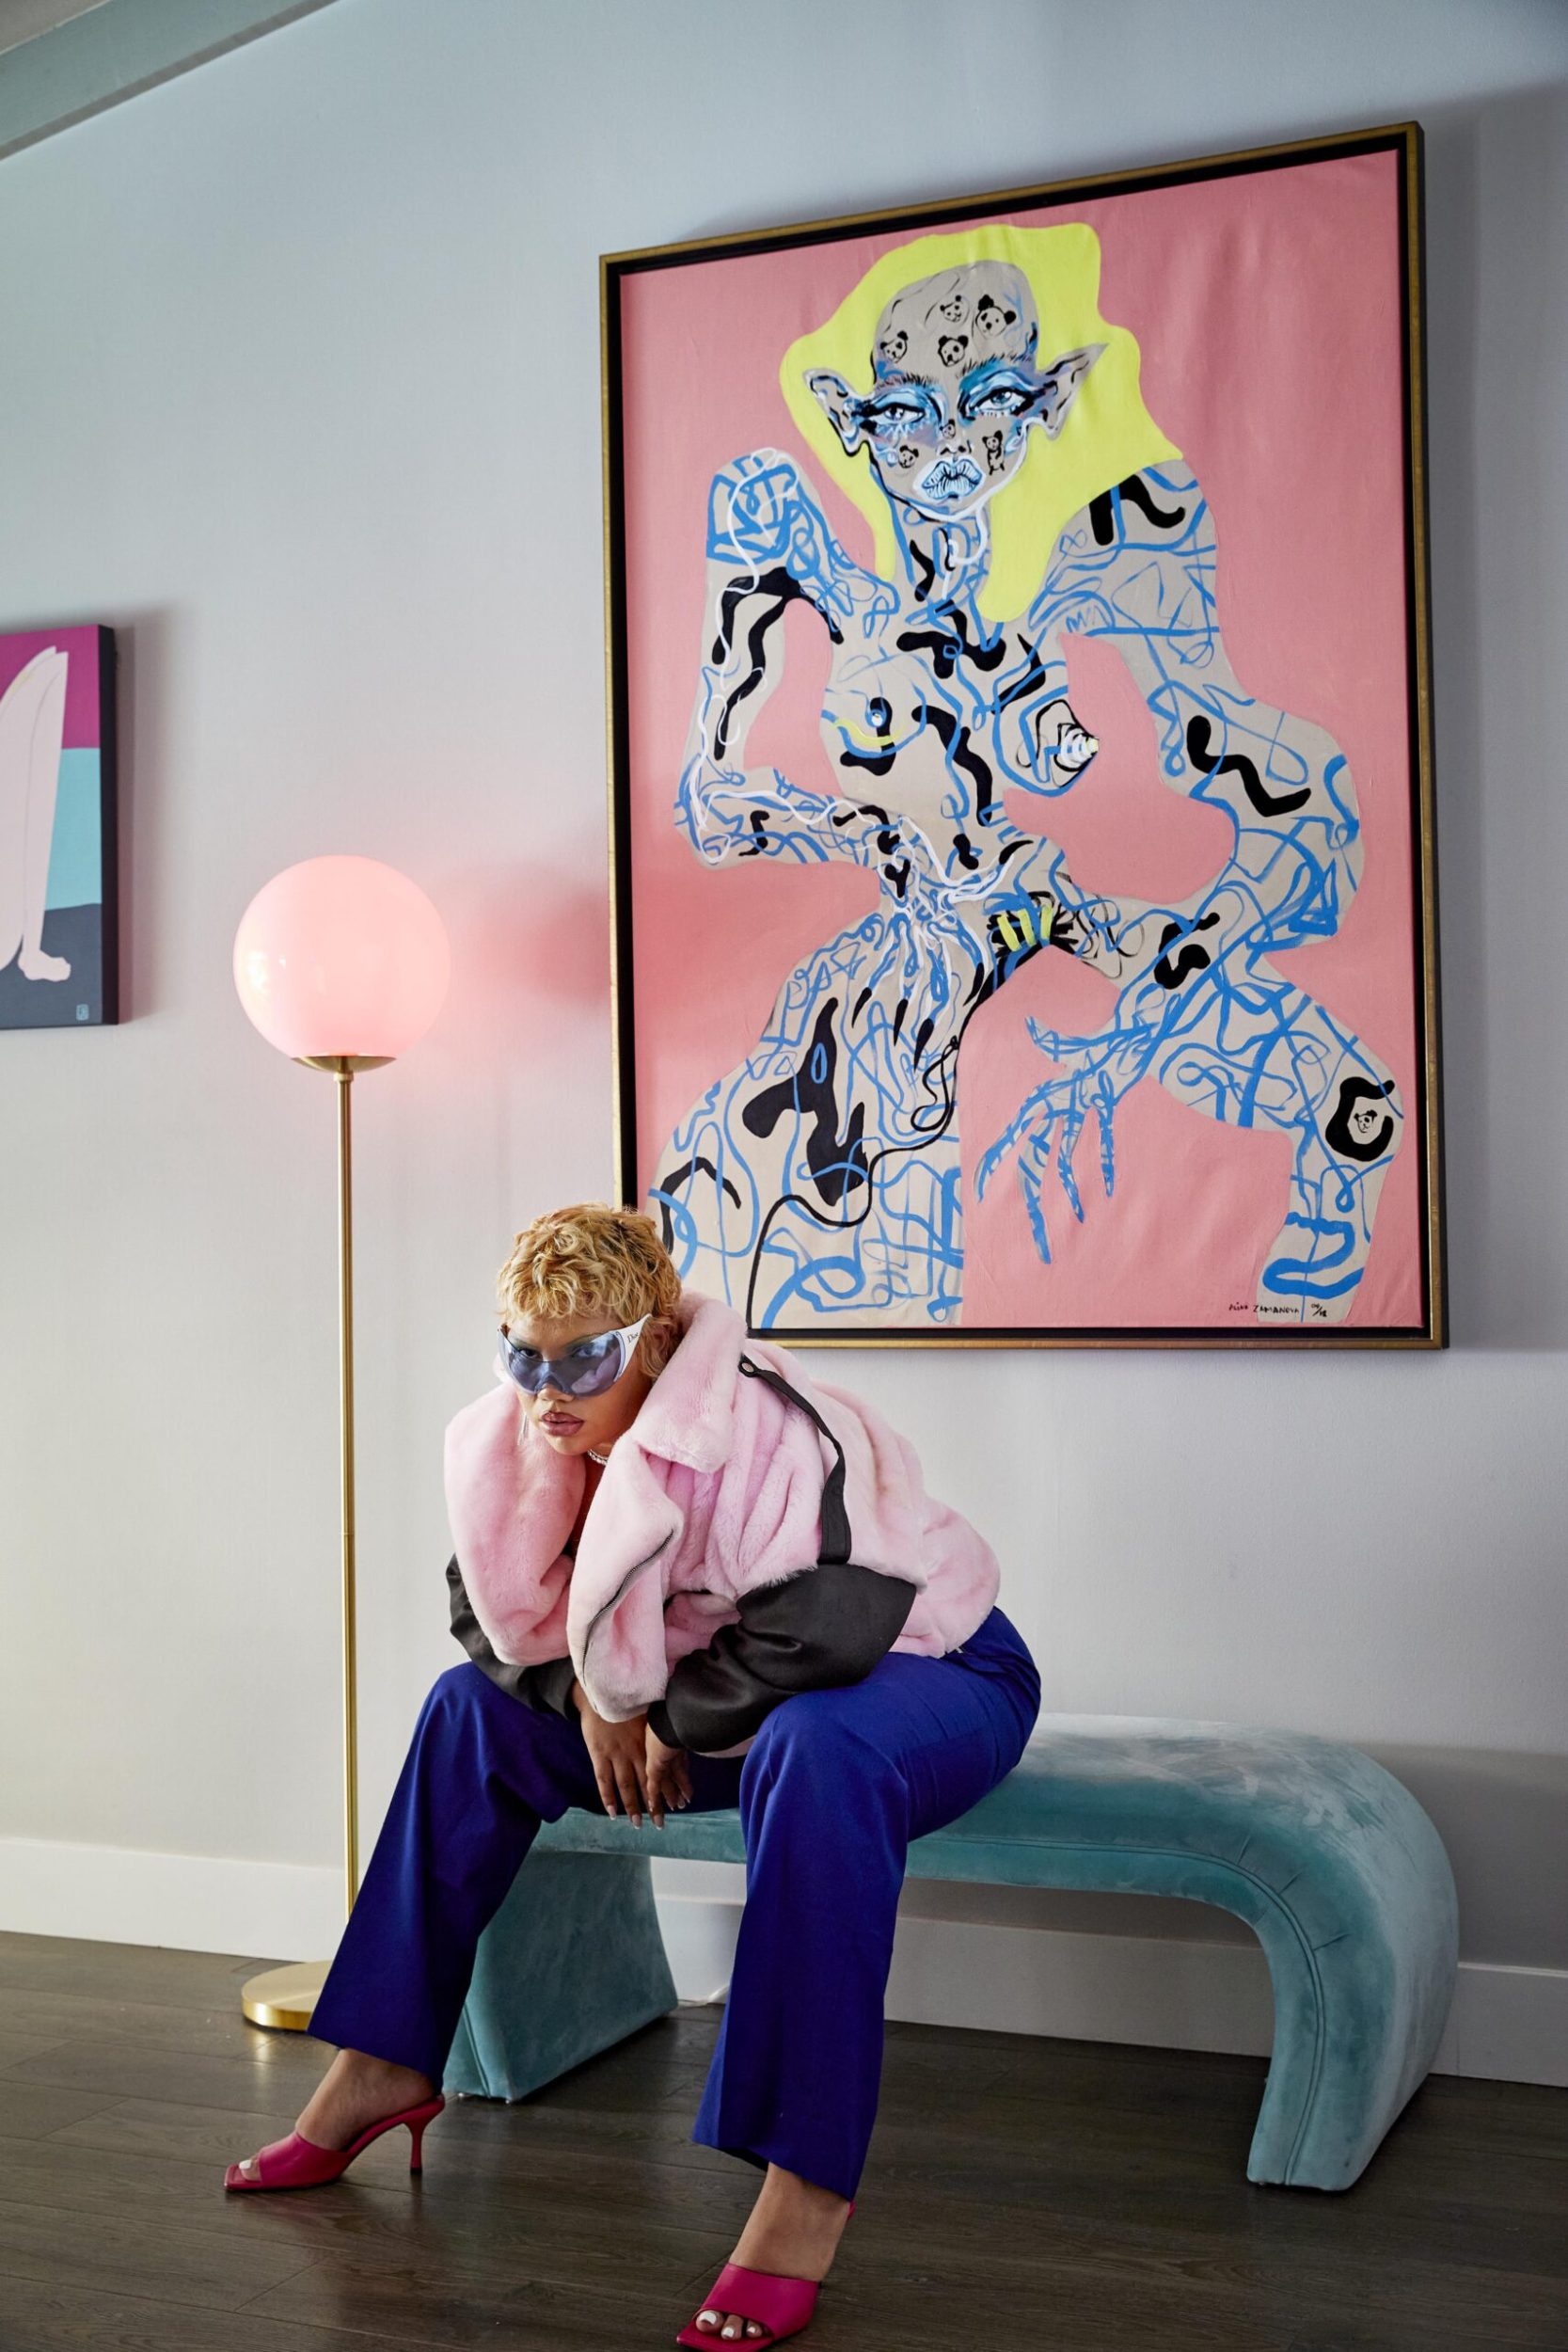 Parris Goebel sitting on a curved blue velvet seat wearing a pink jacket and blue pants